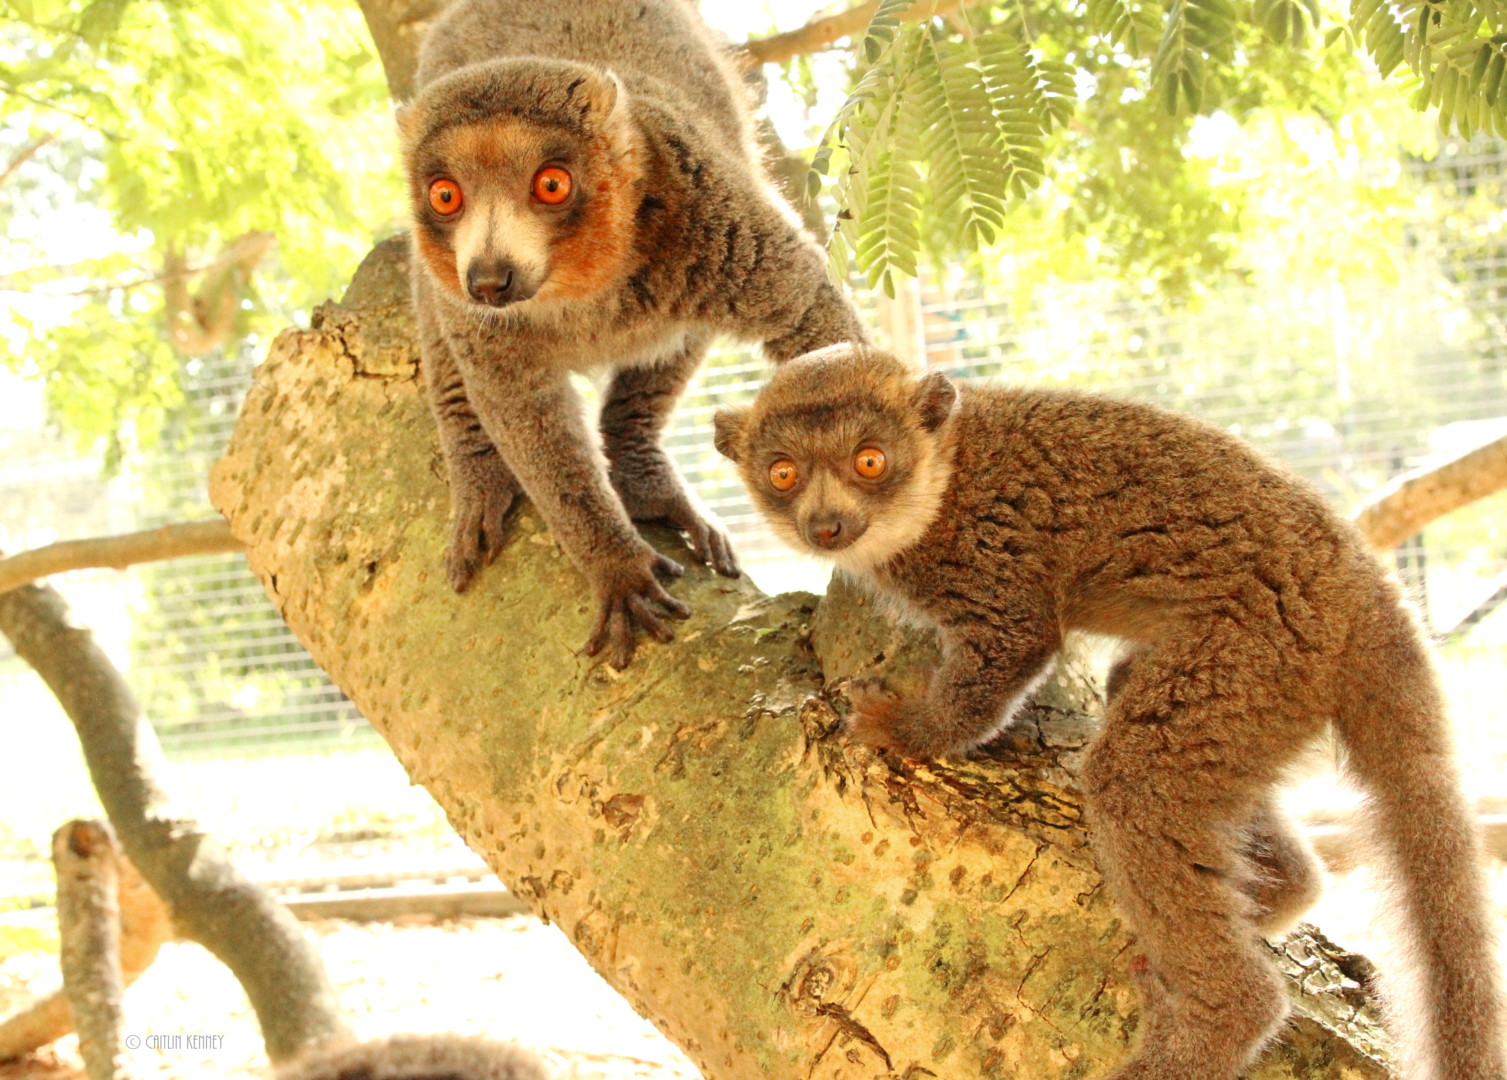 Mongoose lemur brothers Lonzo (L) and LaMelo (R)